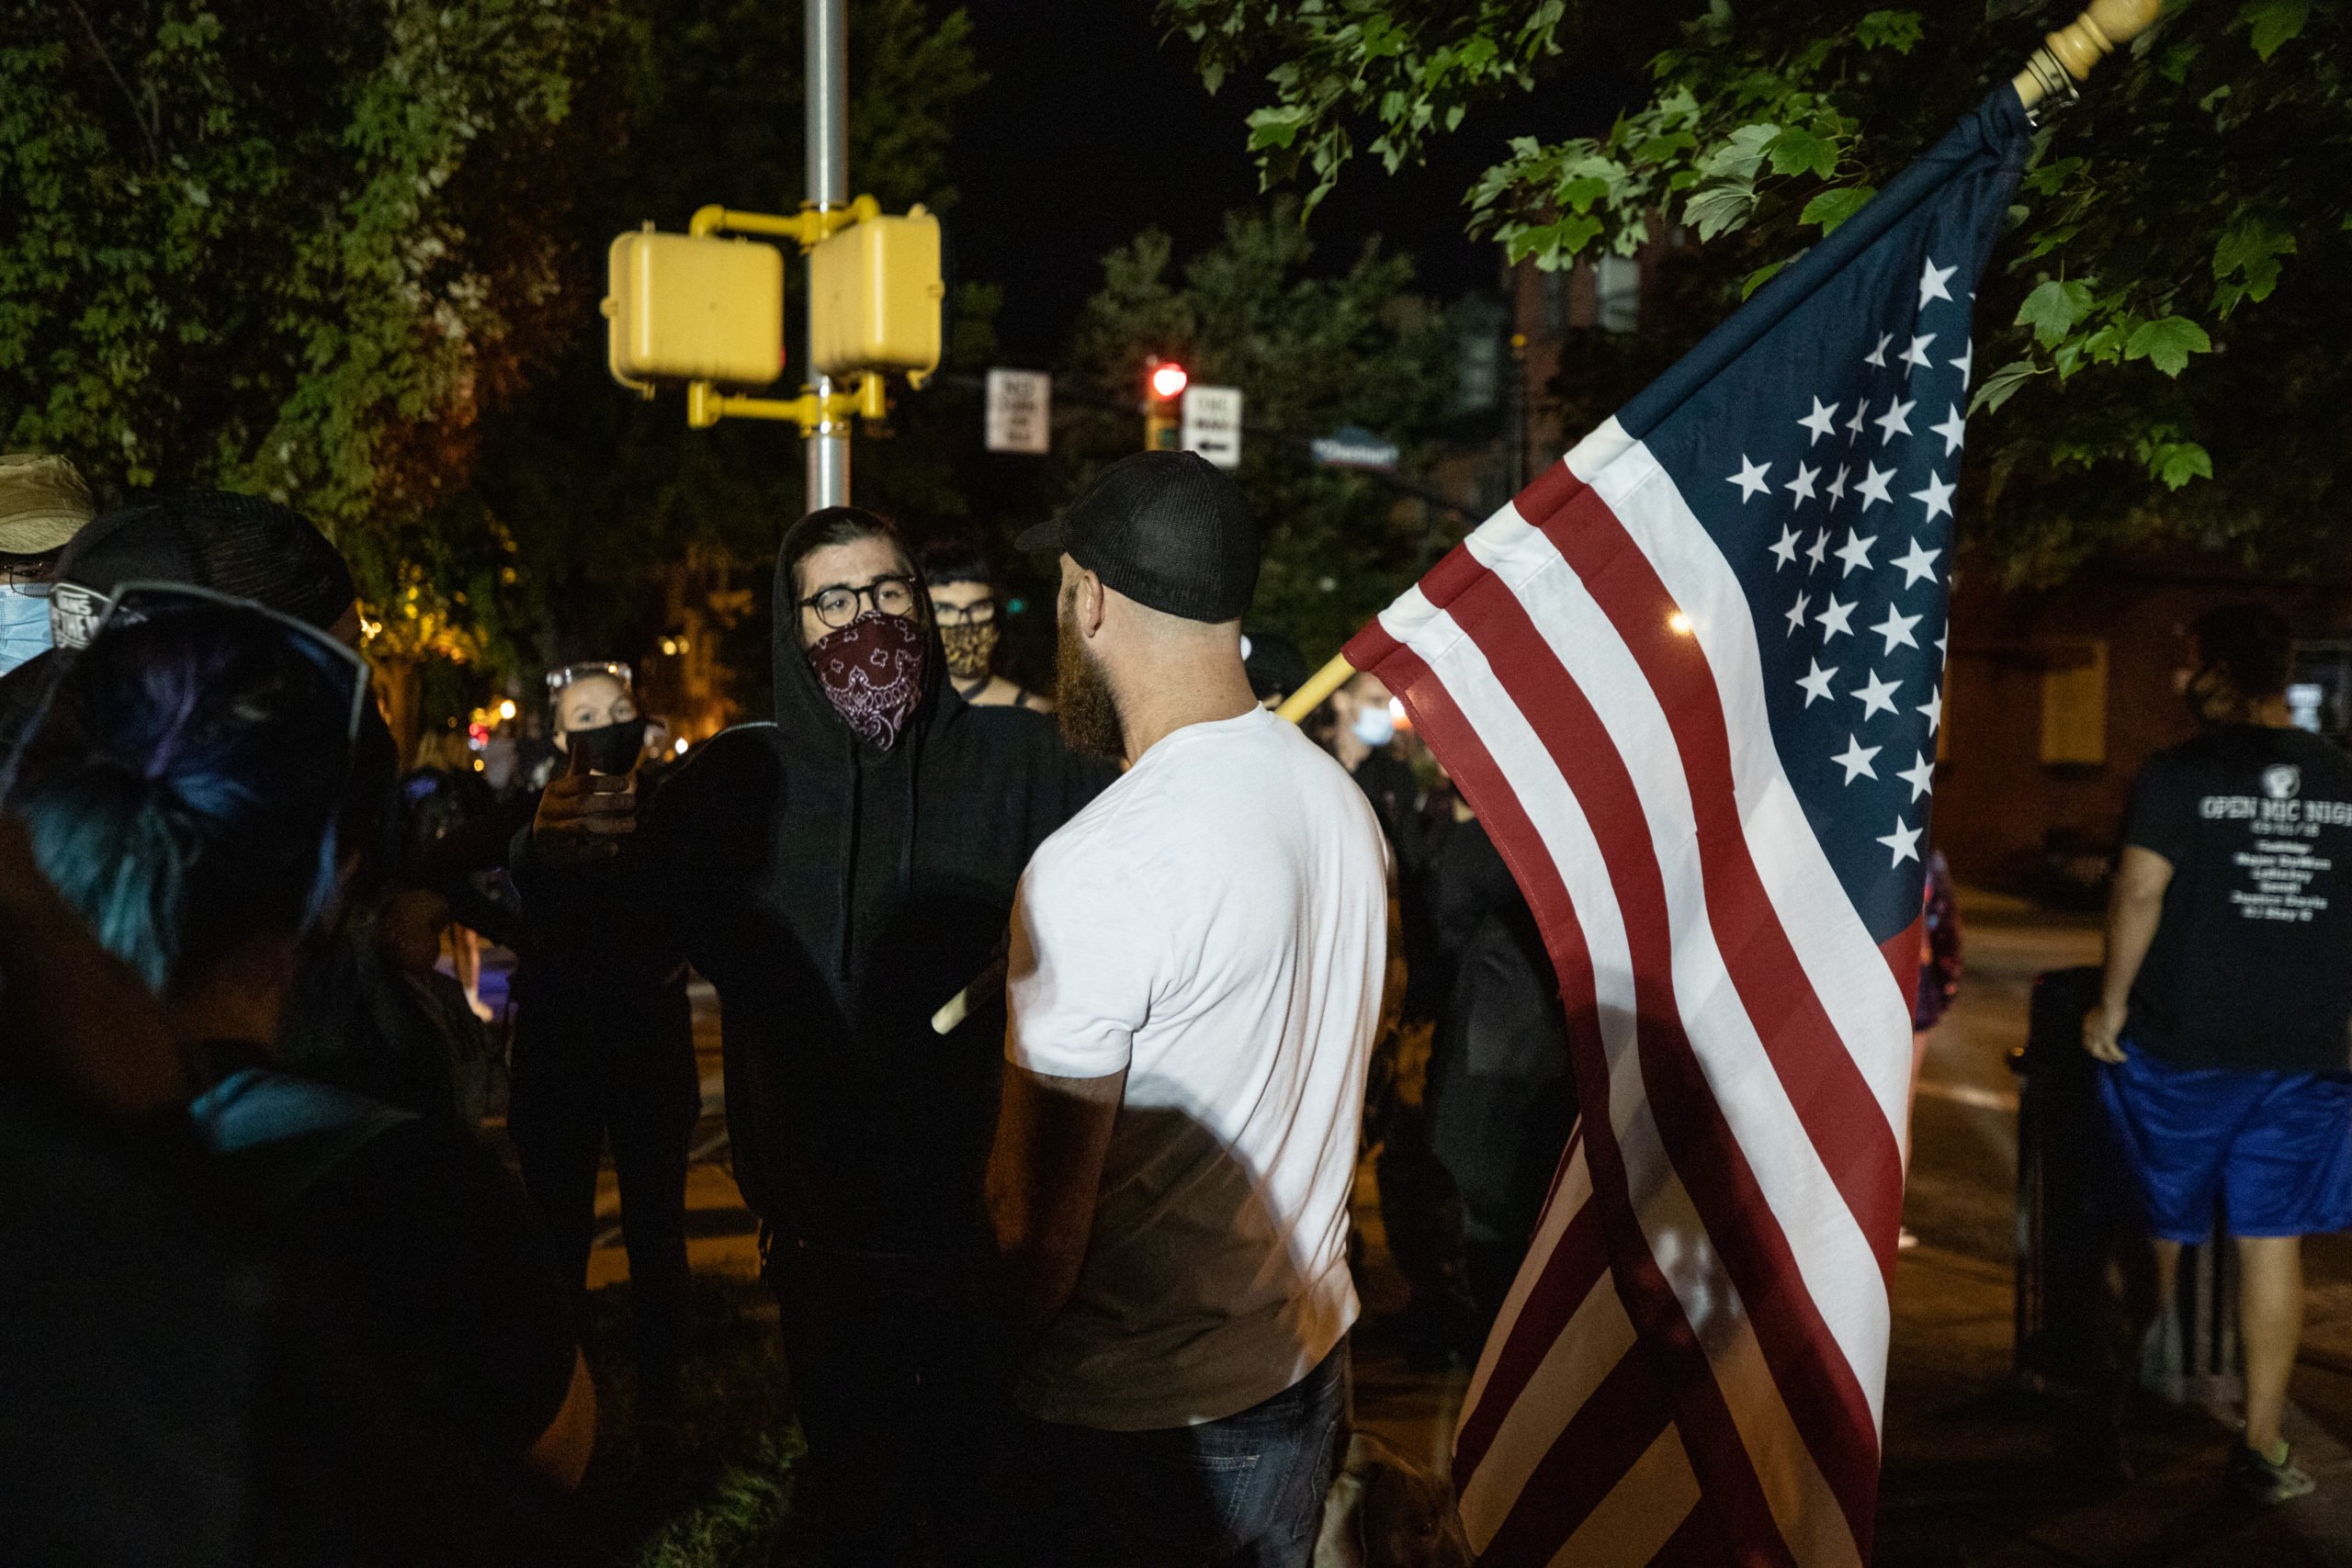 A man with an American flag talked with protesters throughout the night in Lancaster, Philadelphia on Sept. 14, 2020. (Photo - Kaylee Greenlee / Daily Caller News Foundation)